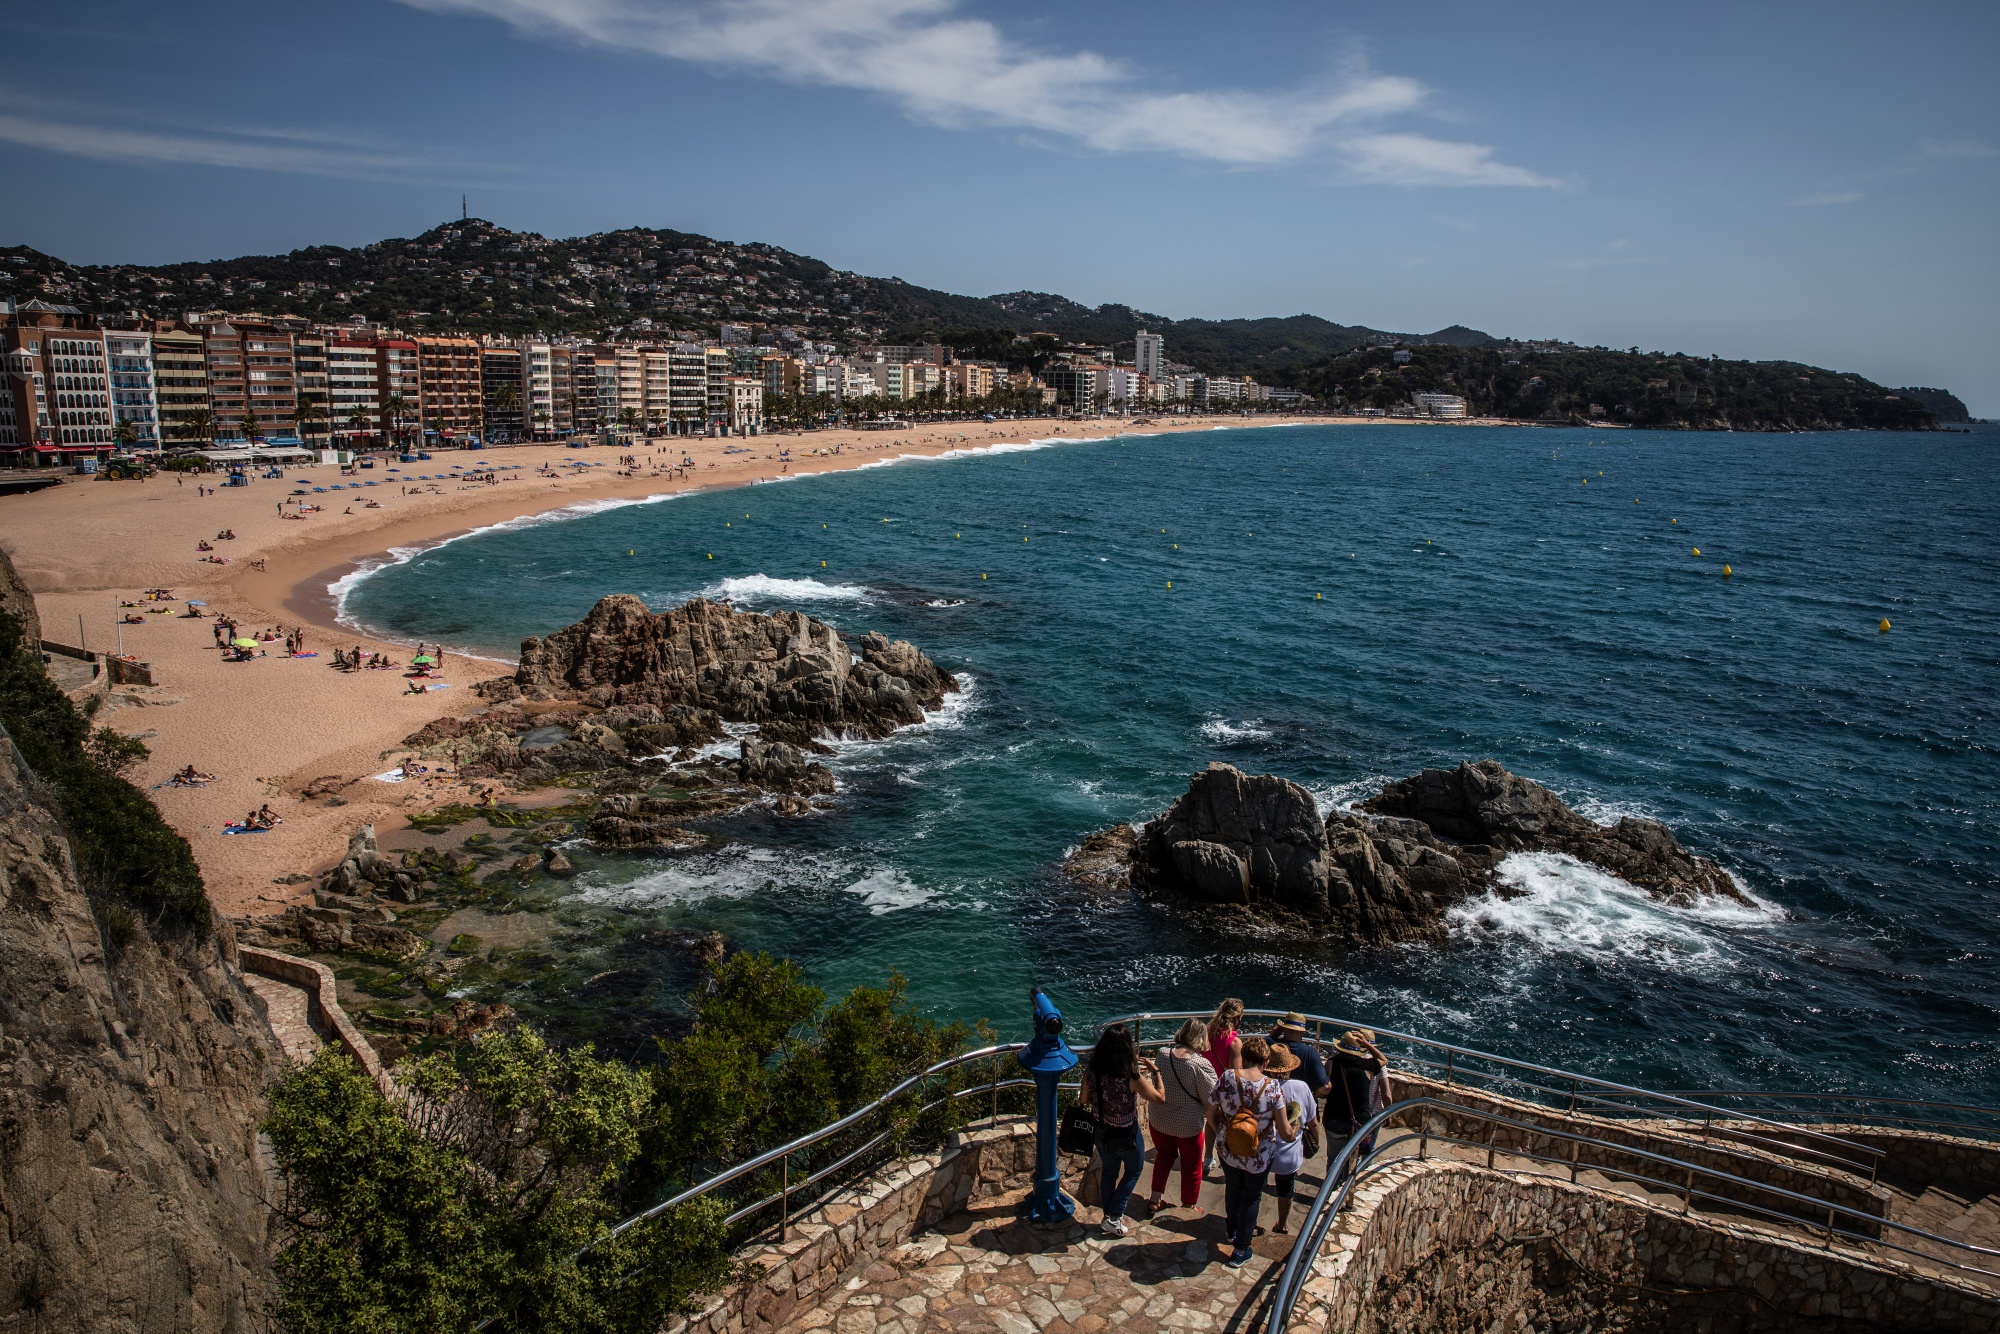 Spain Pledges $809 Million Package to Bolster Tourism Industry - Bloomberg